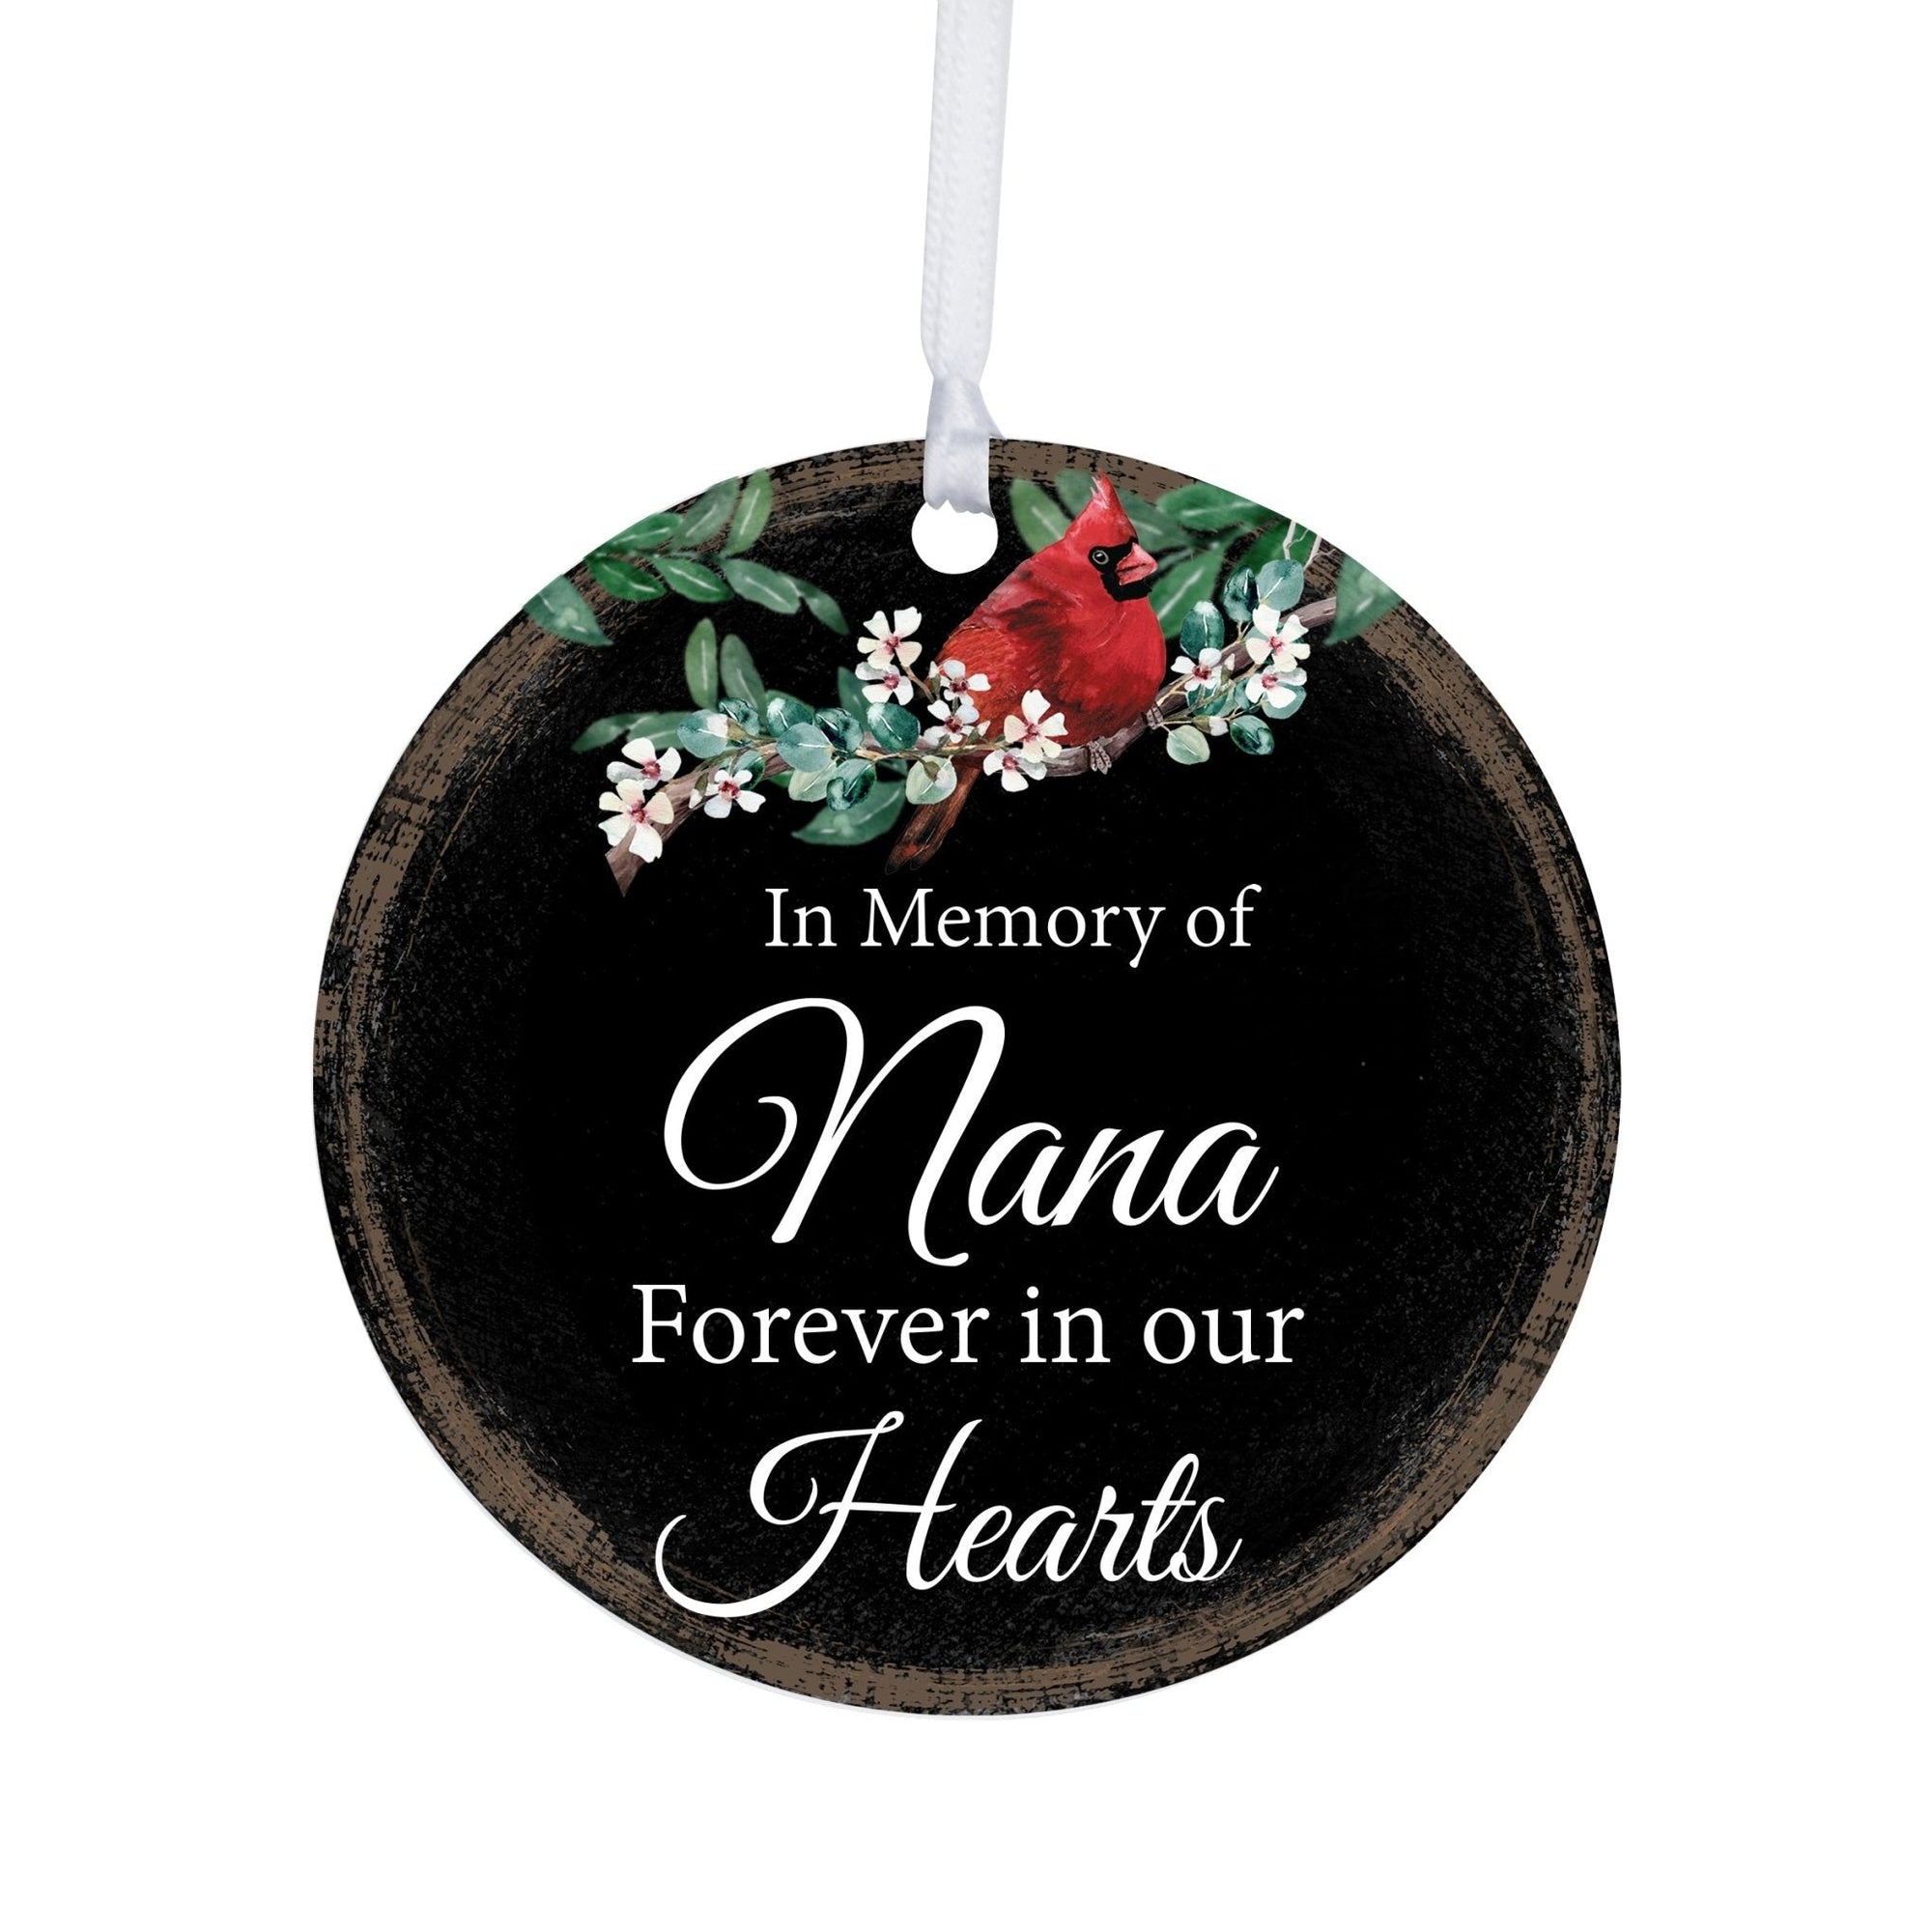 Memorials for loved ones through a unique and meaningful memorial ornament.